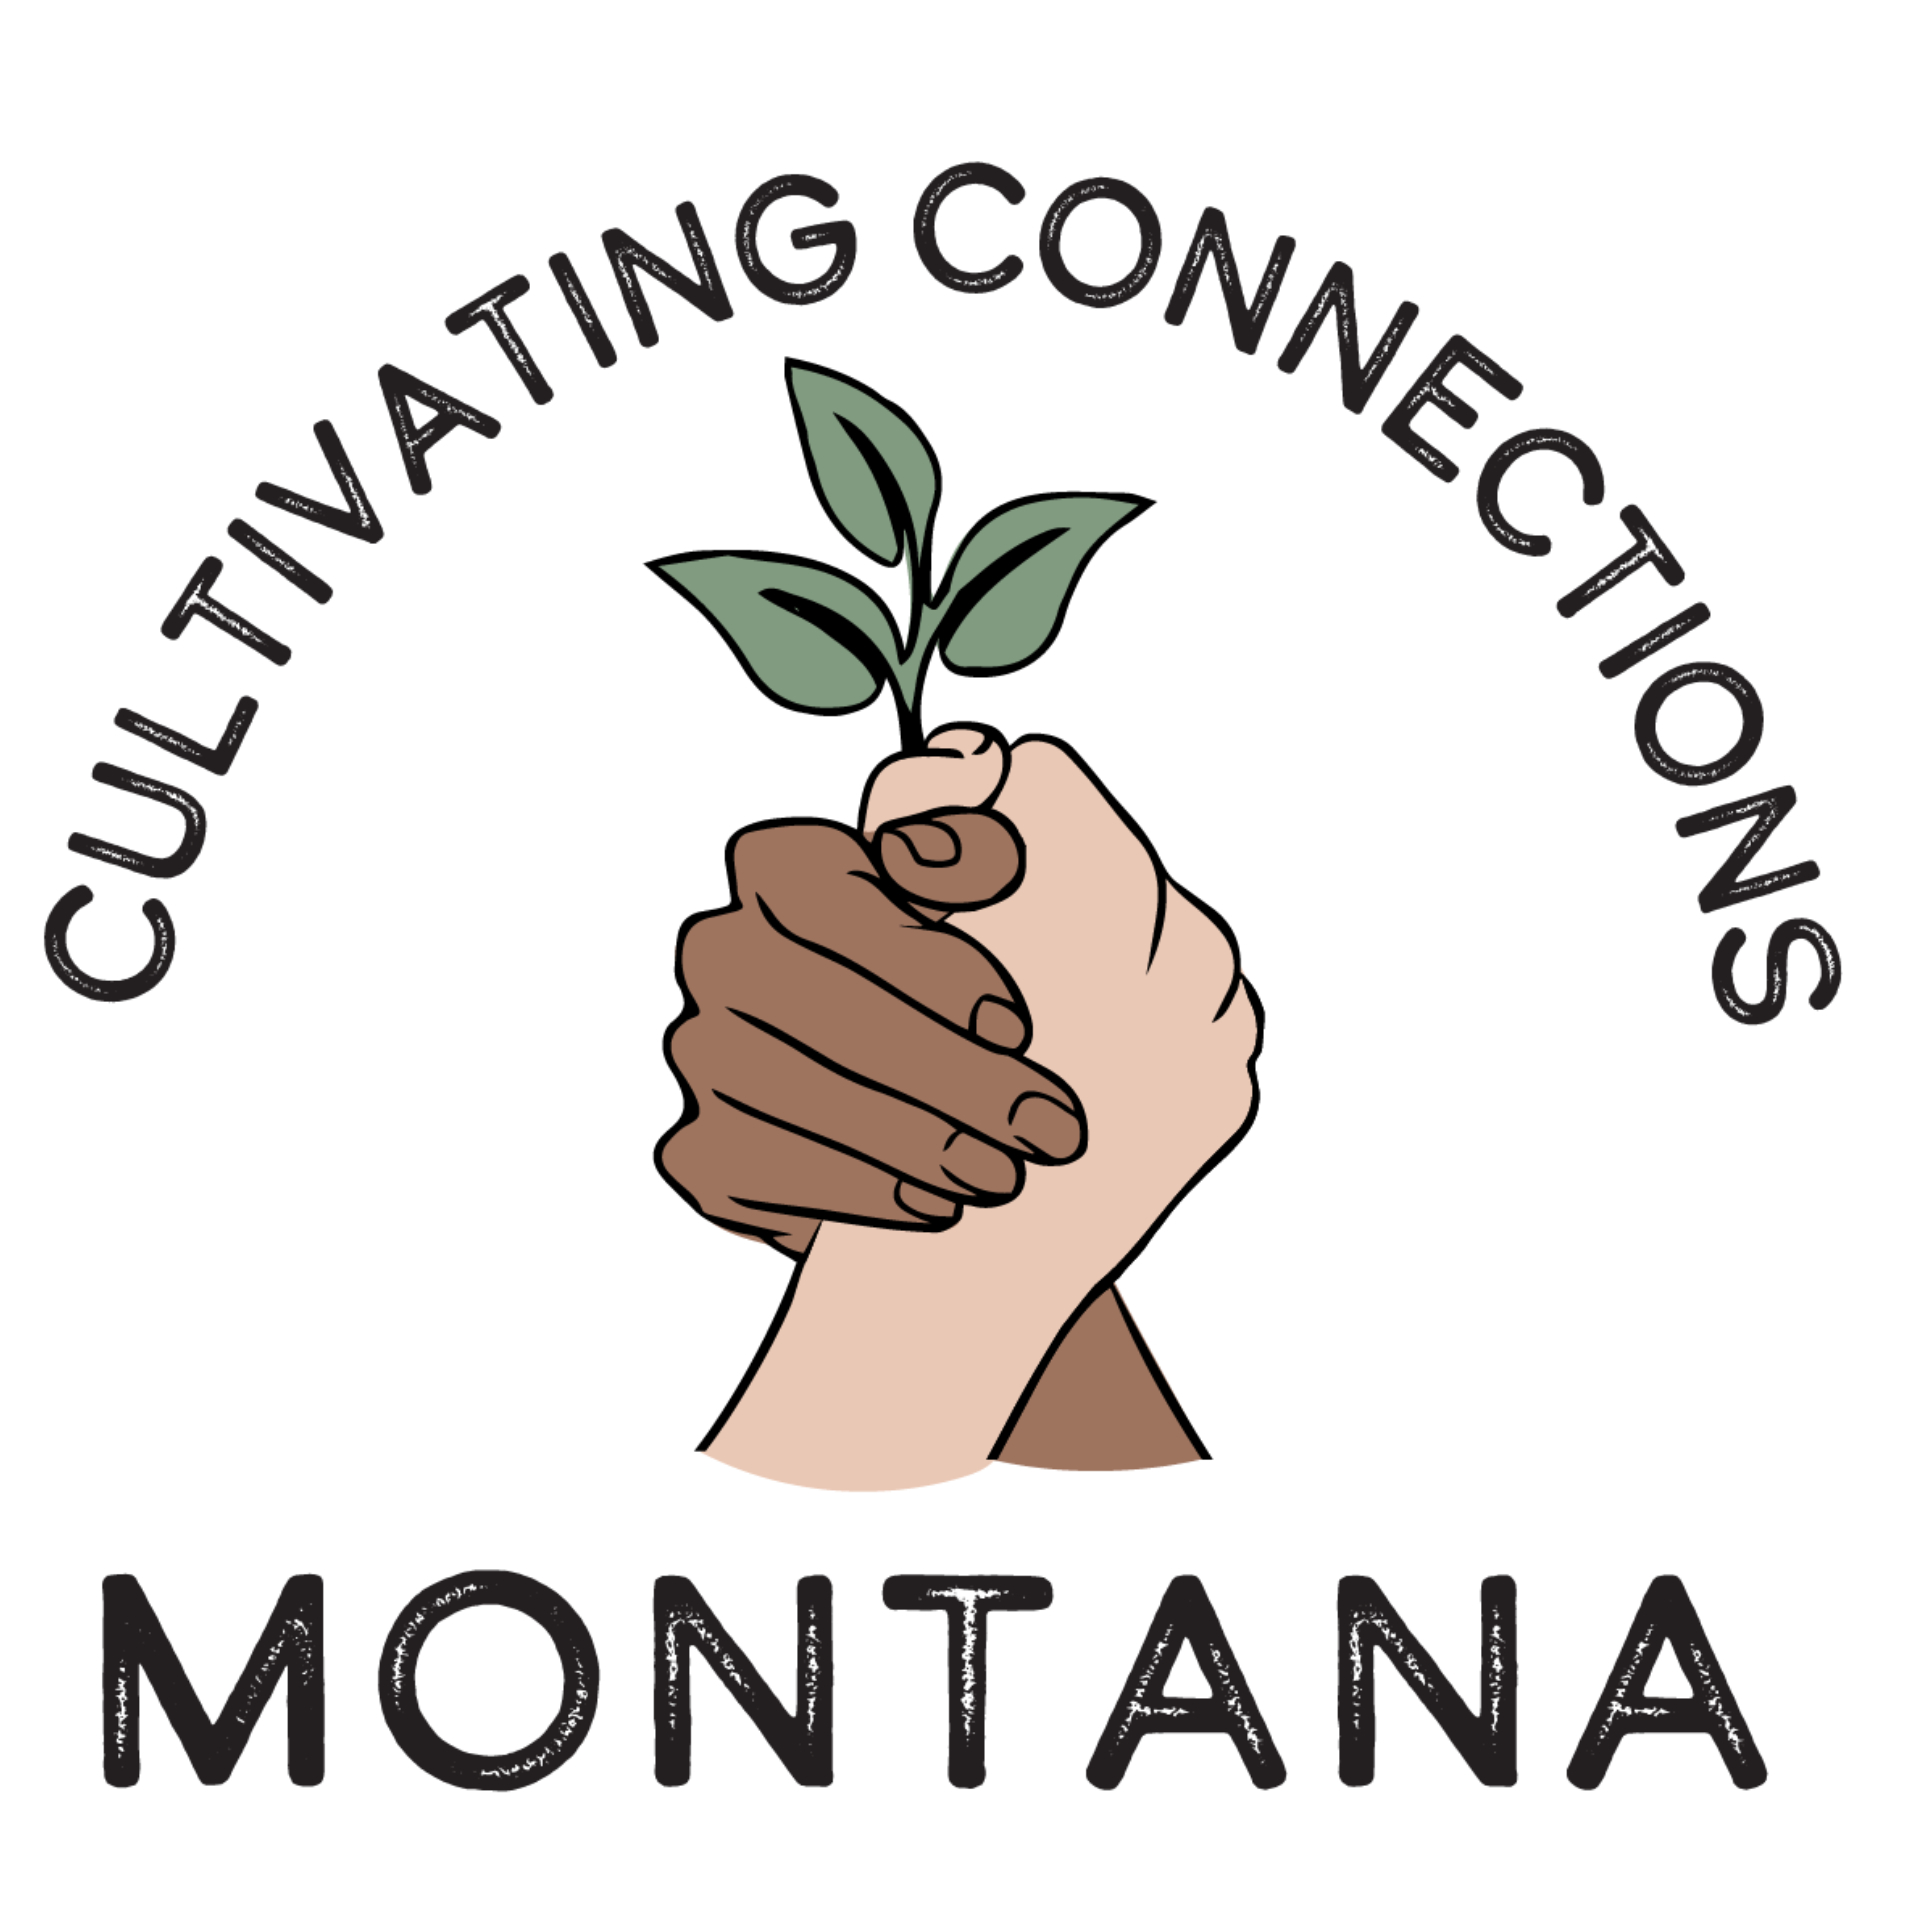 Cultivating Connections